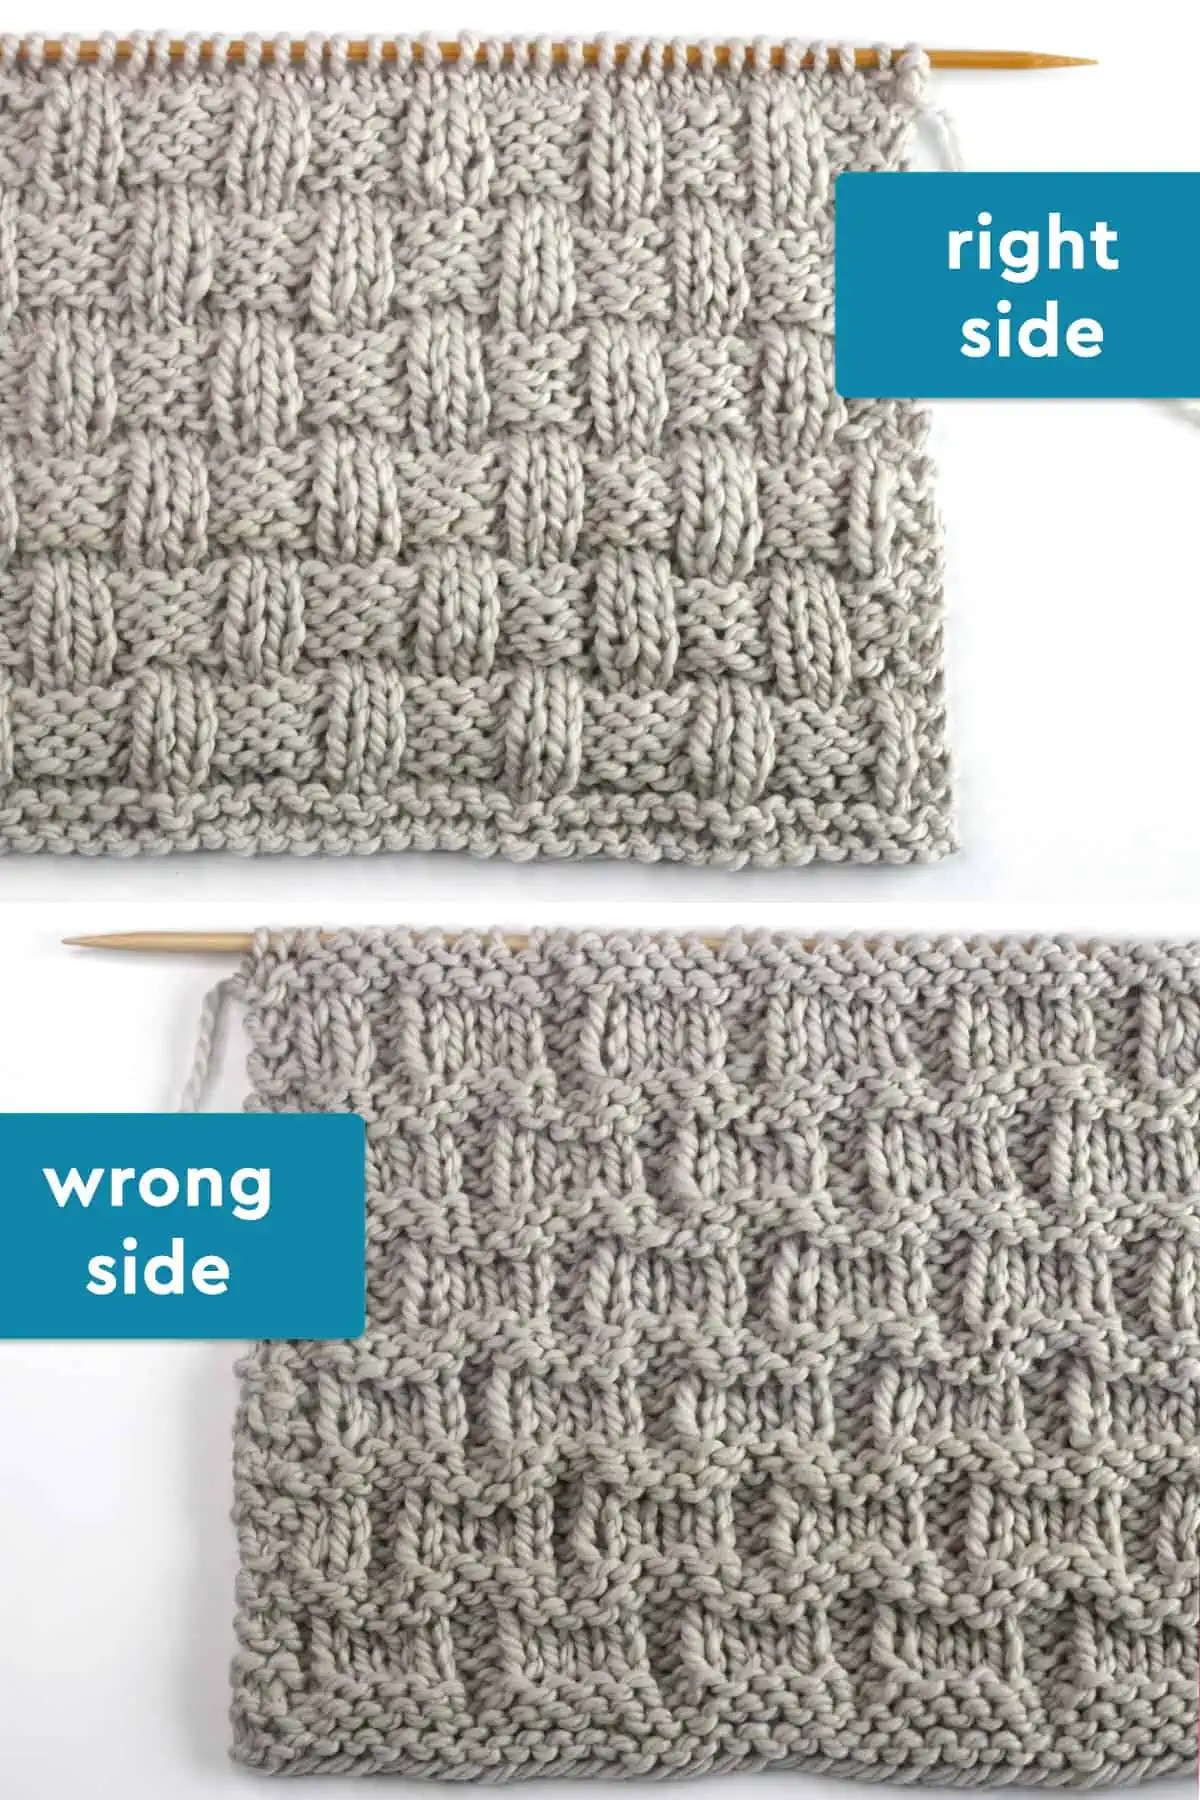 Right and wrong sides of the Basket Weave Stitch in beige colored yarn on knitting needle.